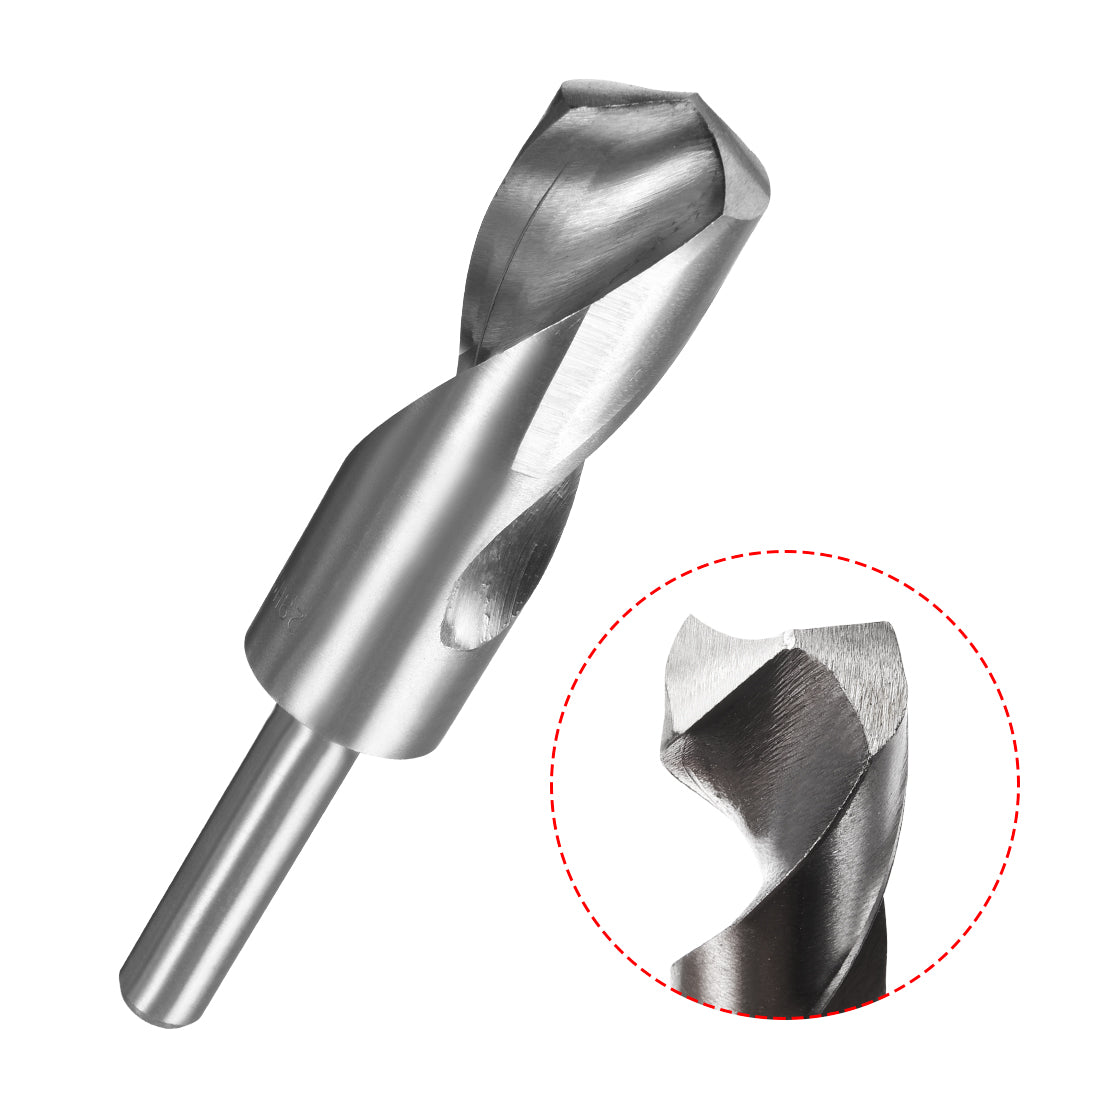 uxcell Uxcell 29mm Reduced Shank Drill Bit High Speed Steel 4241 with 1/2" Straight Shank